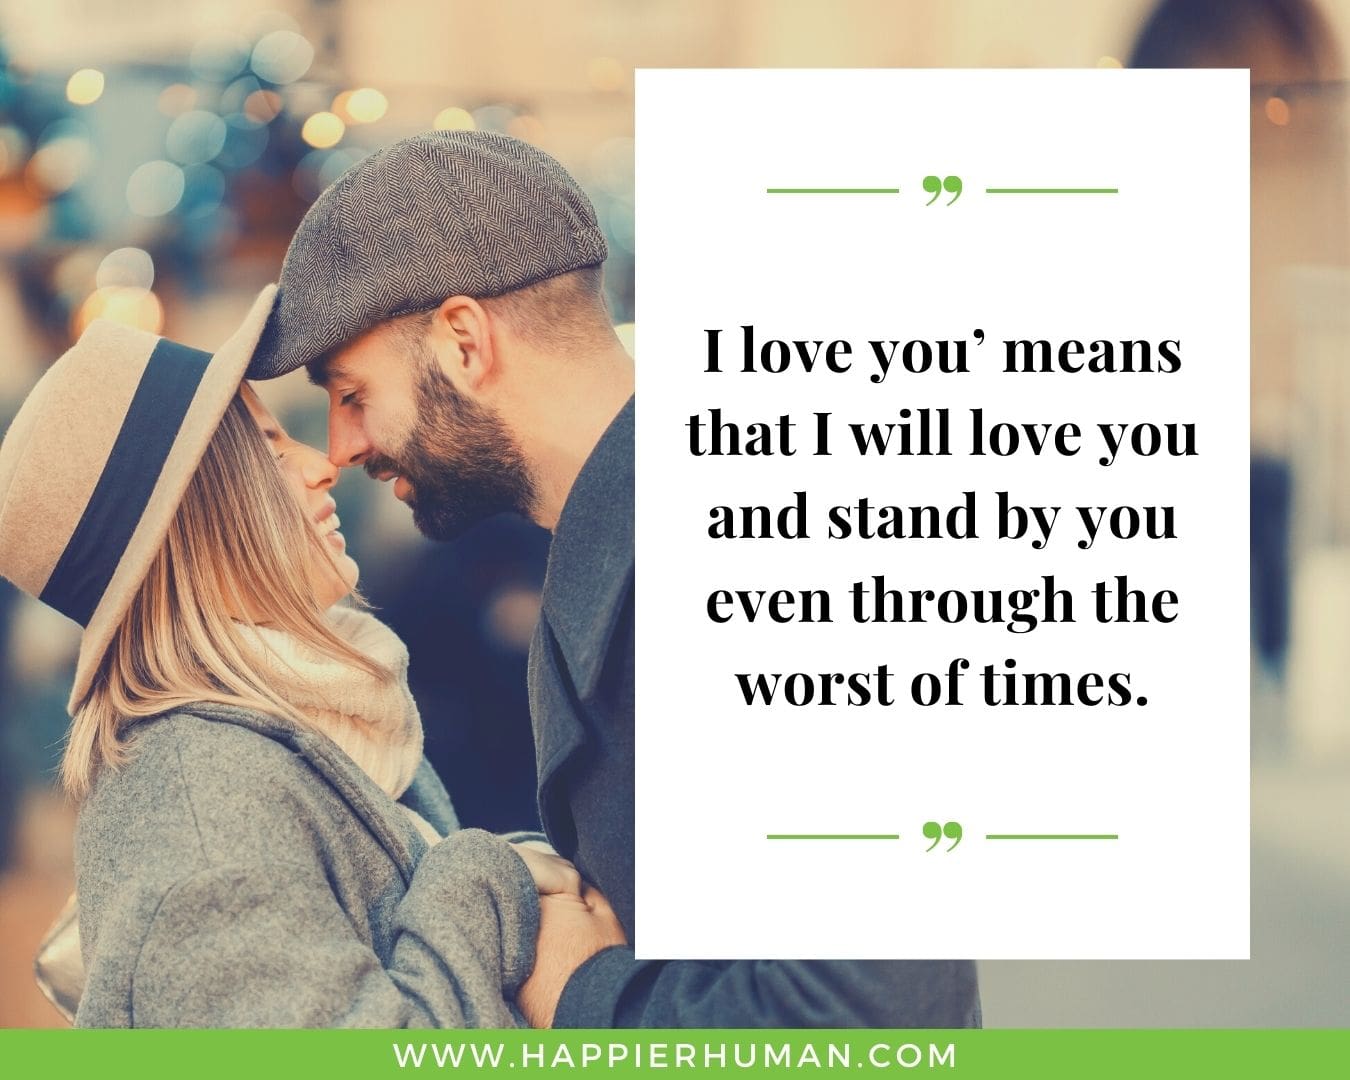 Sweet Love Quotes for Your Girlfriend - “’I love you’ means that I will love you and stand by you even through the worst of times.”